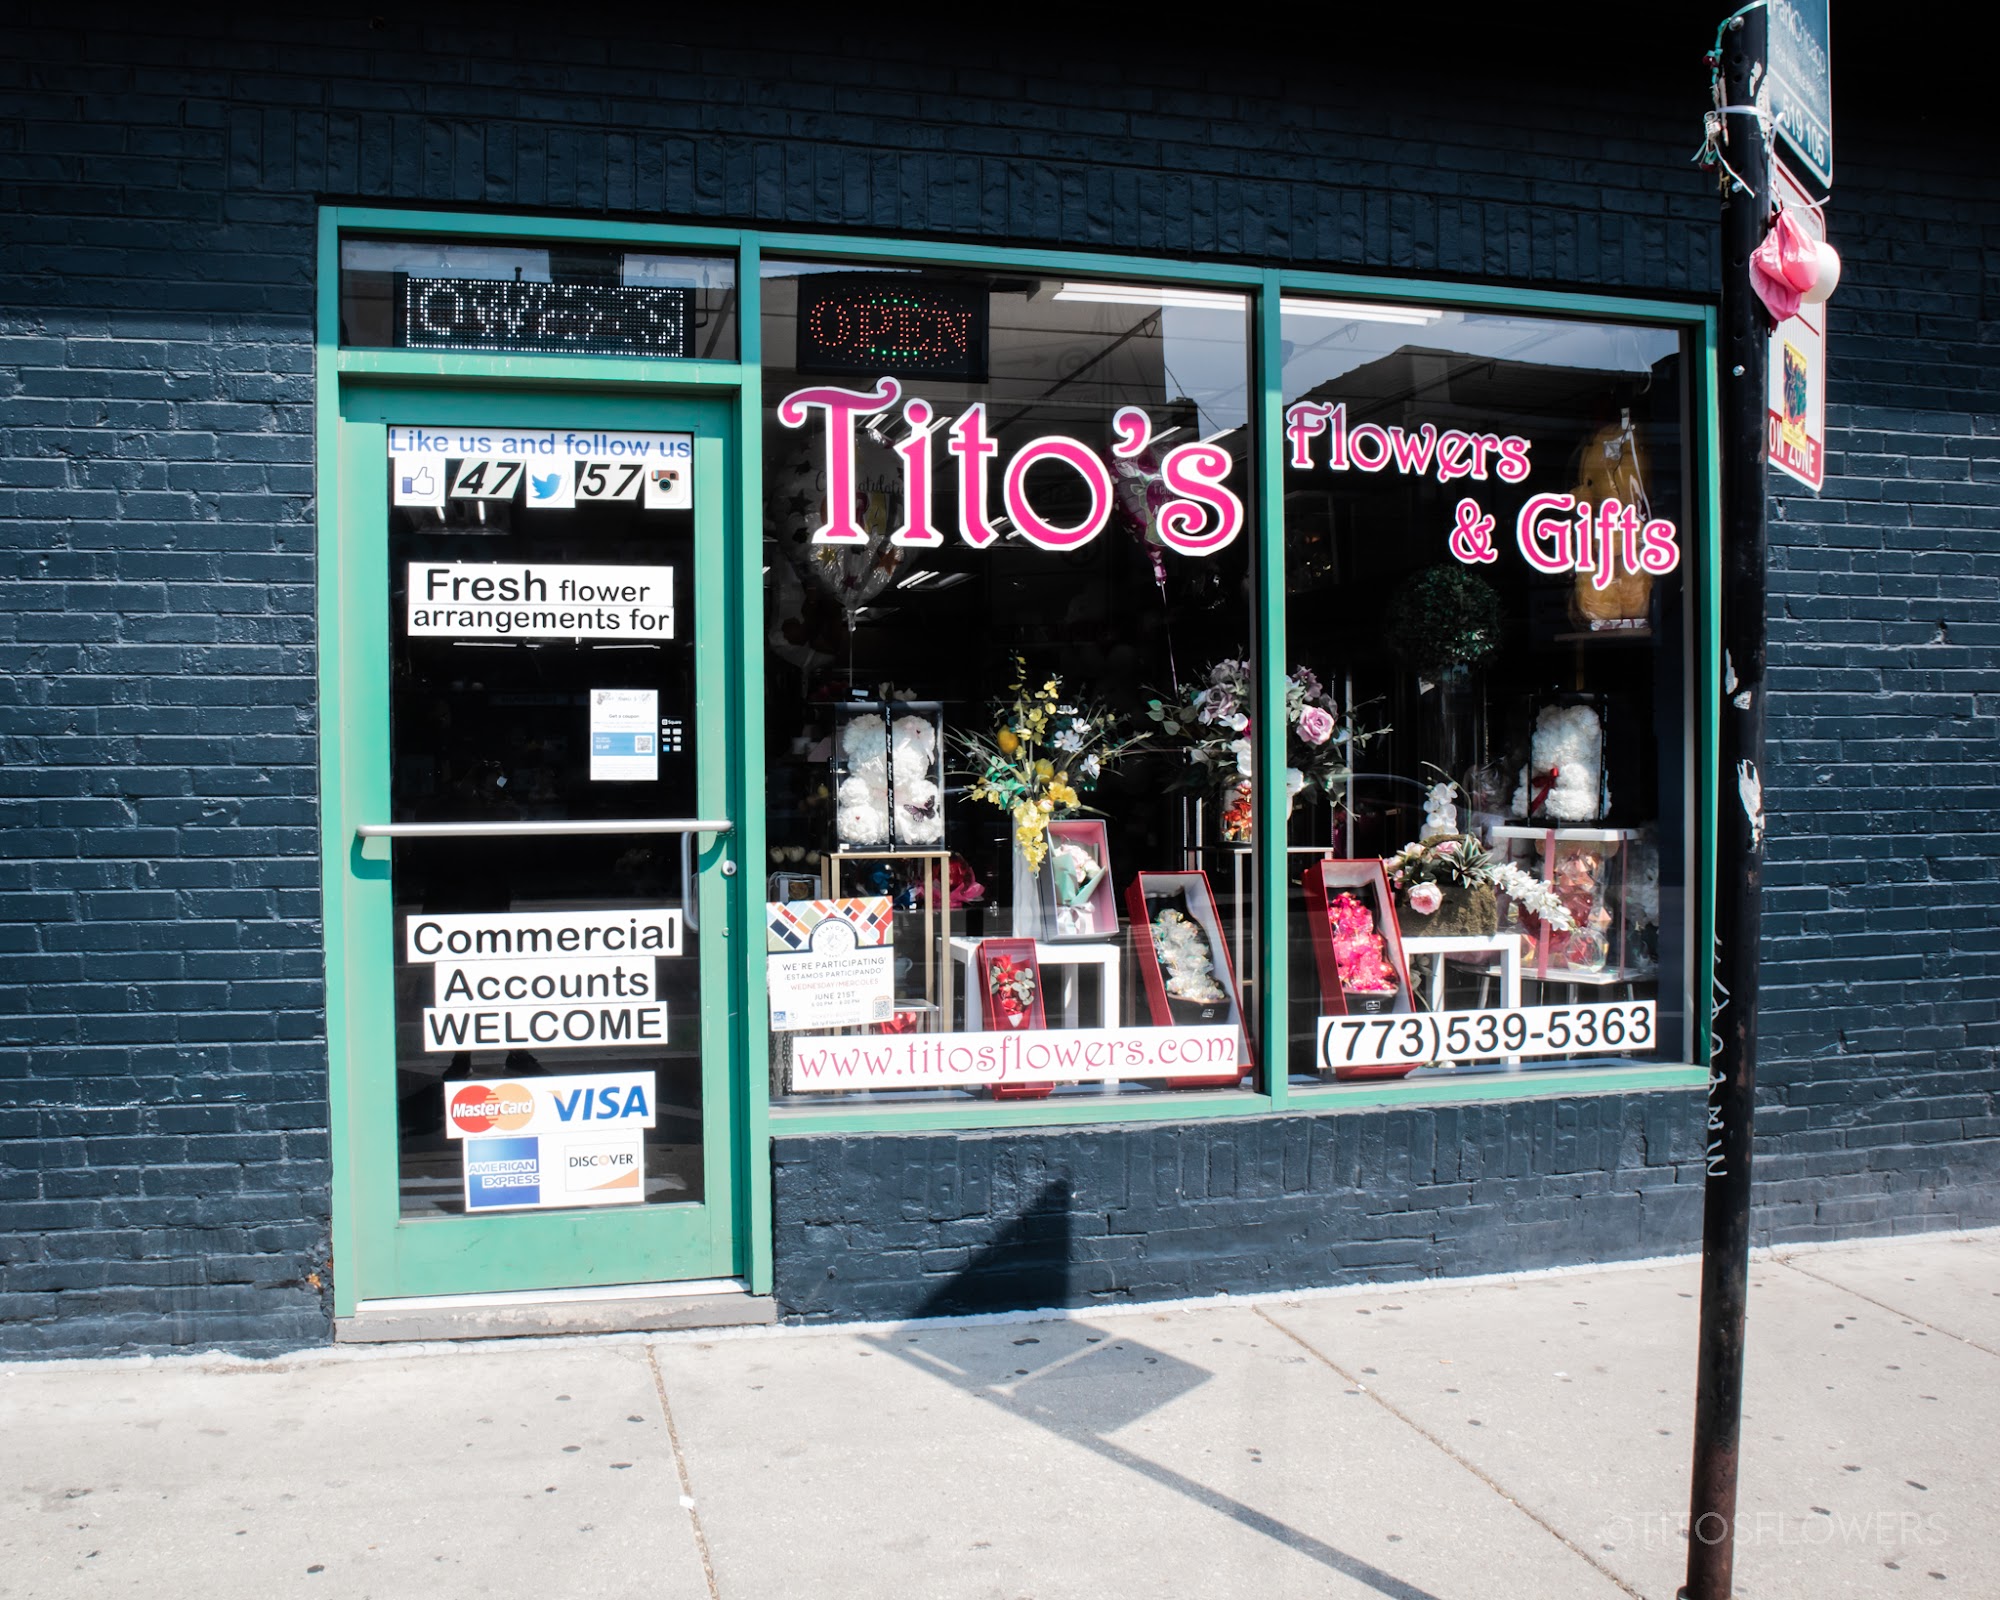 Tito's Flowers and Gifts Inc.